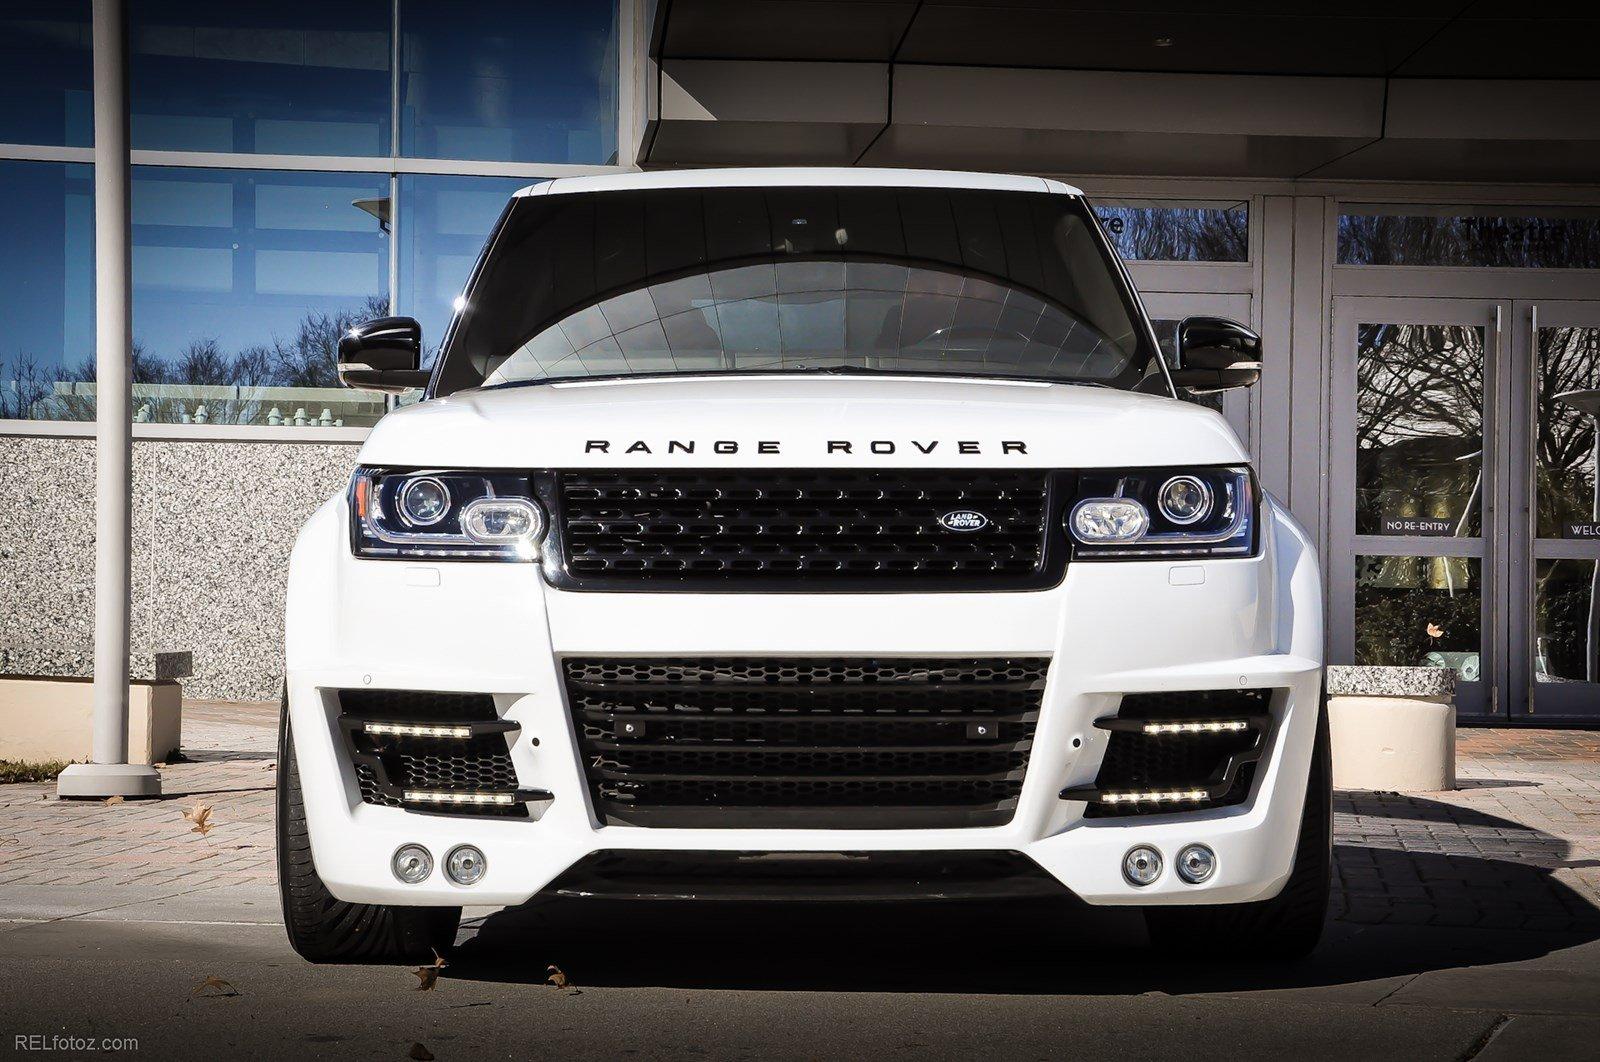 Used 2014 Land Rover Range Rover Supercharged Autobiography for sale Sold at Gravity Autos Marietta in Marietta GA 30060 3